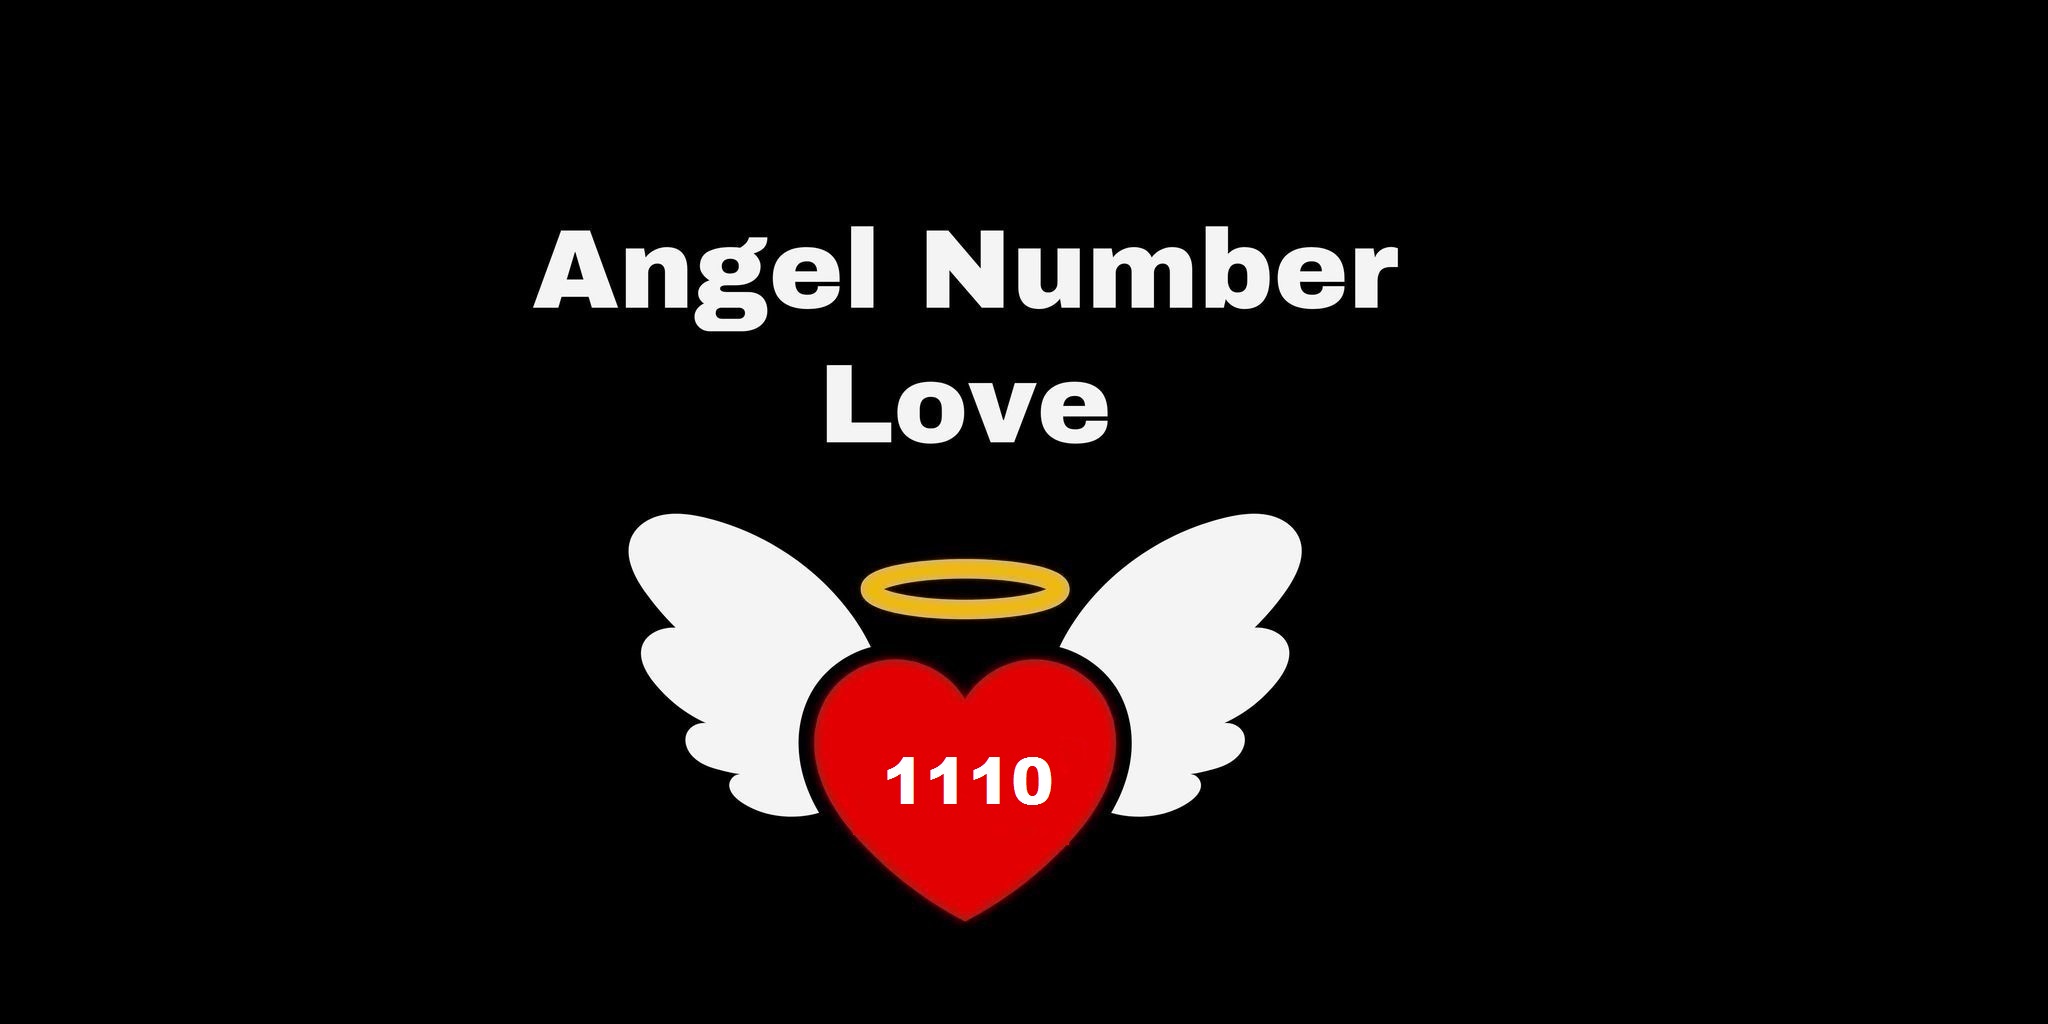 1110 Angel Number Meaning In Love